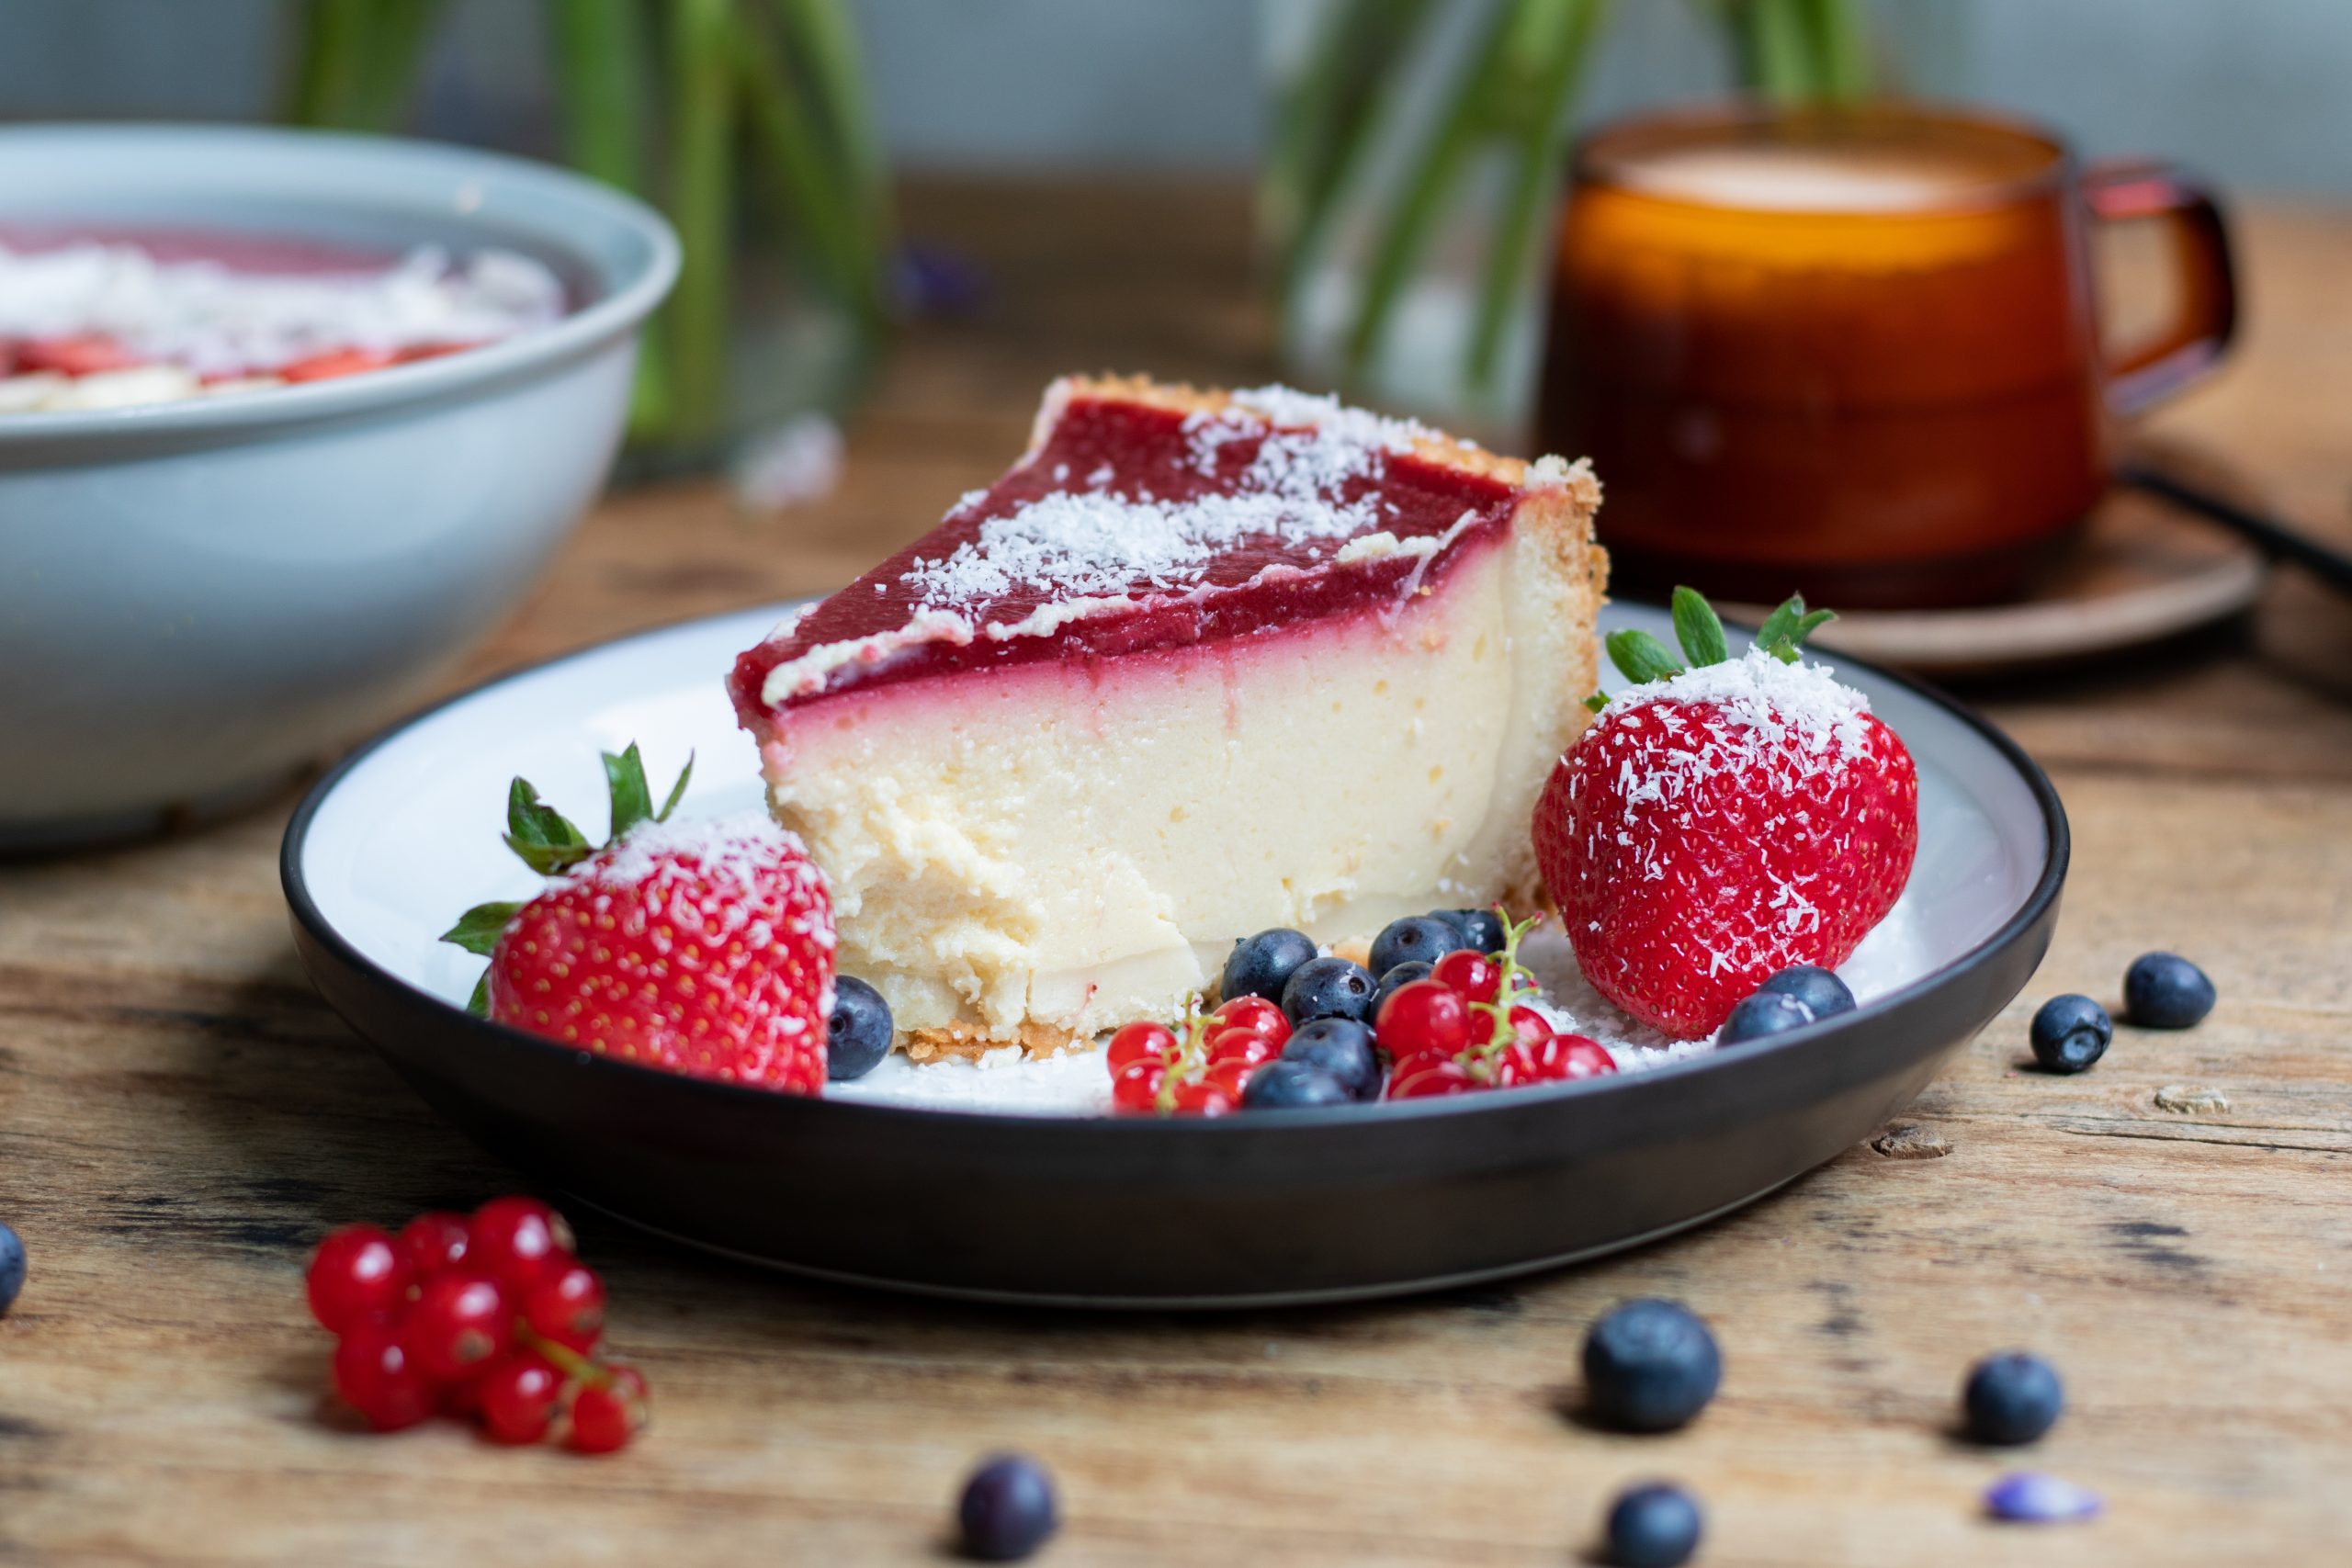 A closeup shot of cheesecake with jelly decorated with strawberries and berries